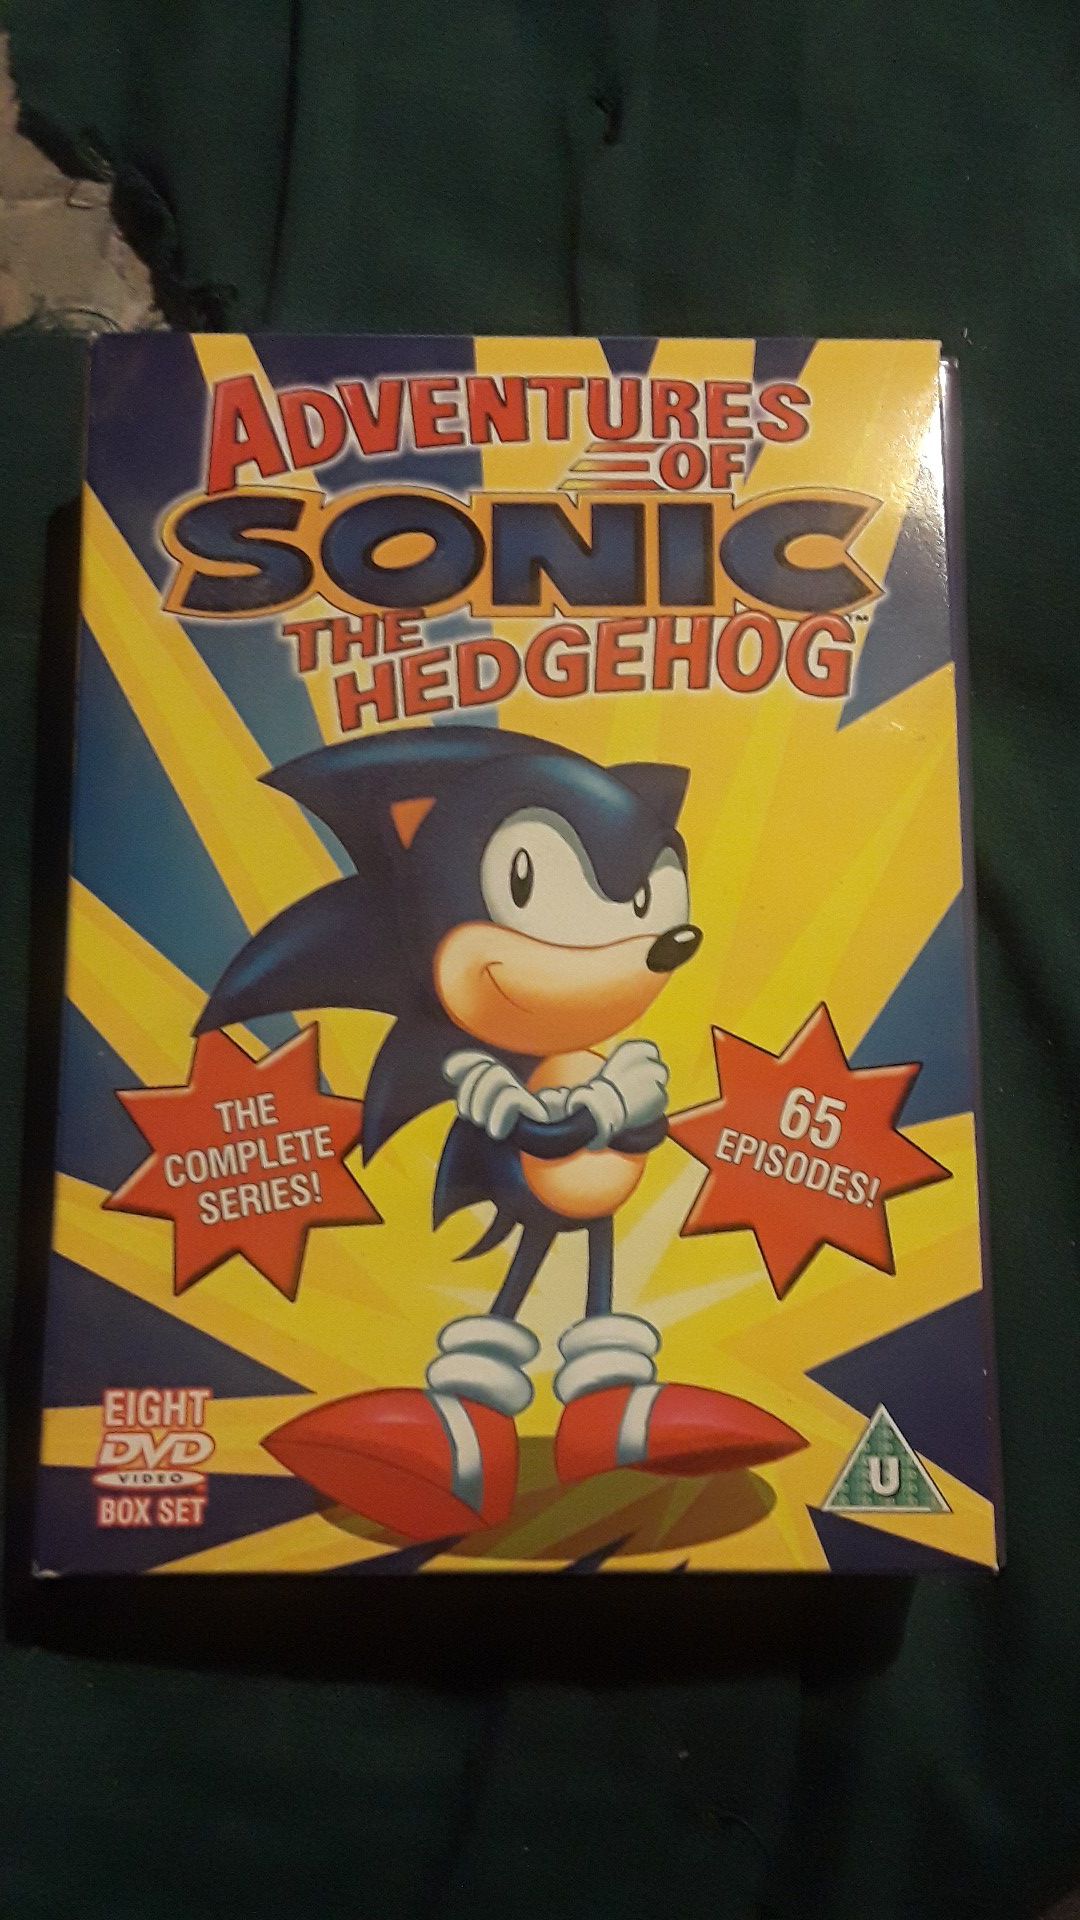 Adventures of sonic the hedgehog the complete series, 65 episodes